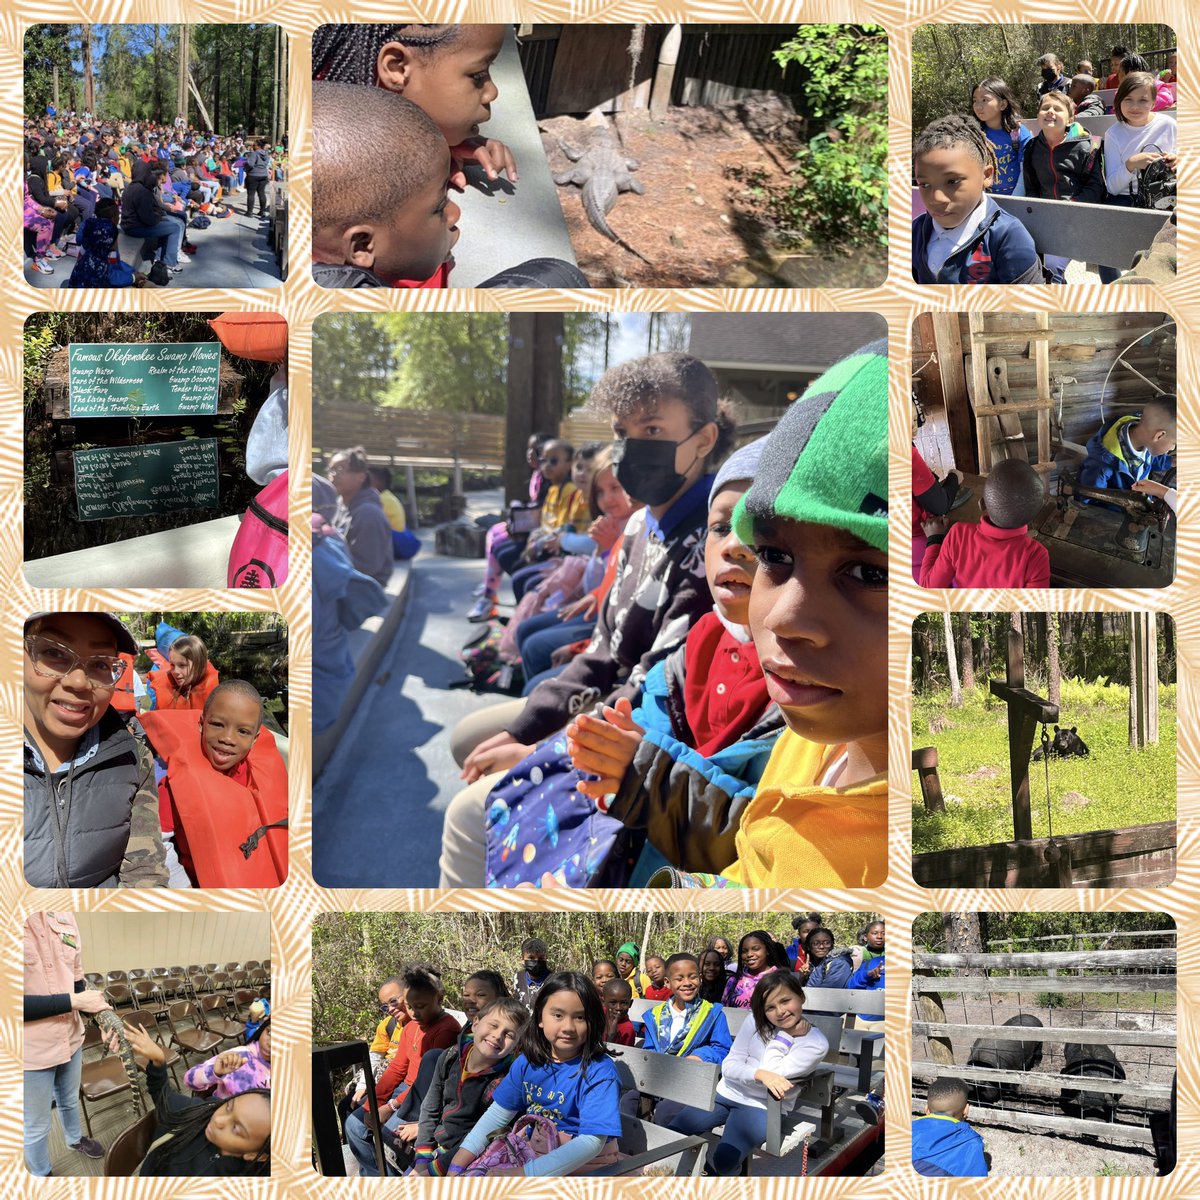 Phenomenal STEAM exploration at the Okefenokee Swamp by students through a living history tour, nature show, and boat and train rides. @APS_Gifted @APSTAGAcademy @APSMAJ_Elem @rob_p_williams_ @melsithole